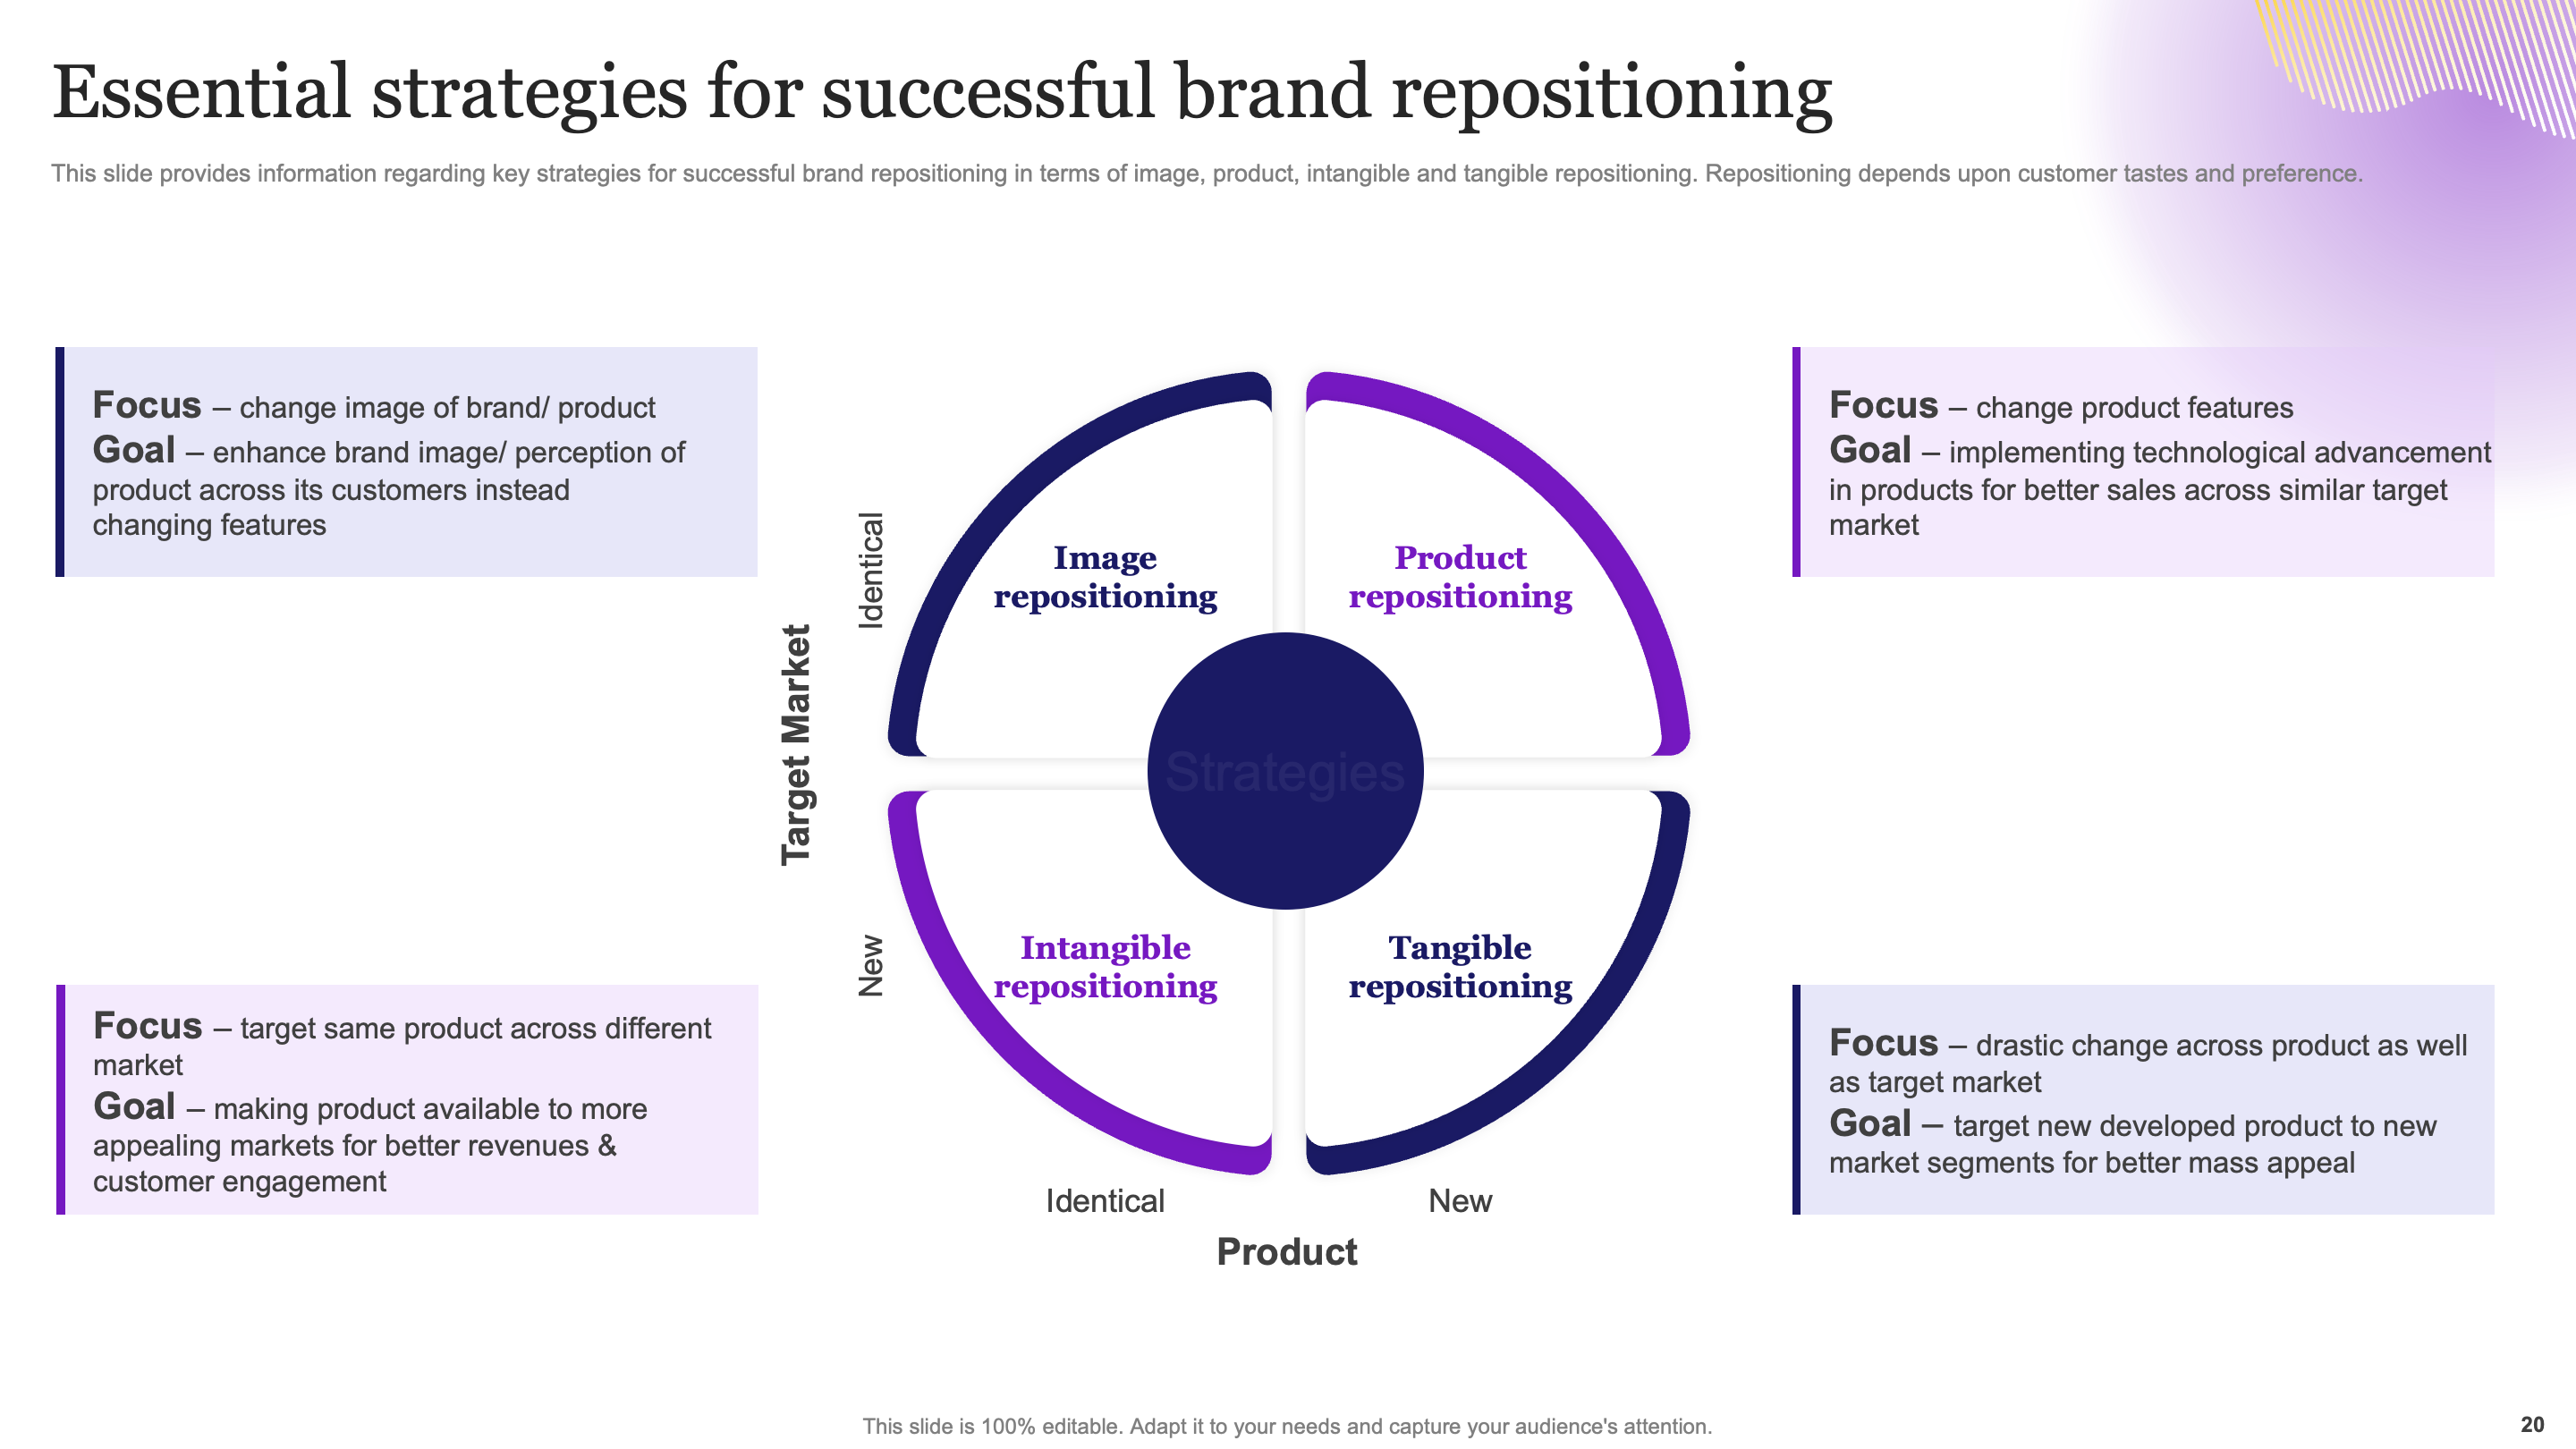 Essential Strategies for Successful Brand Repositioning